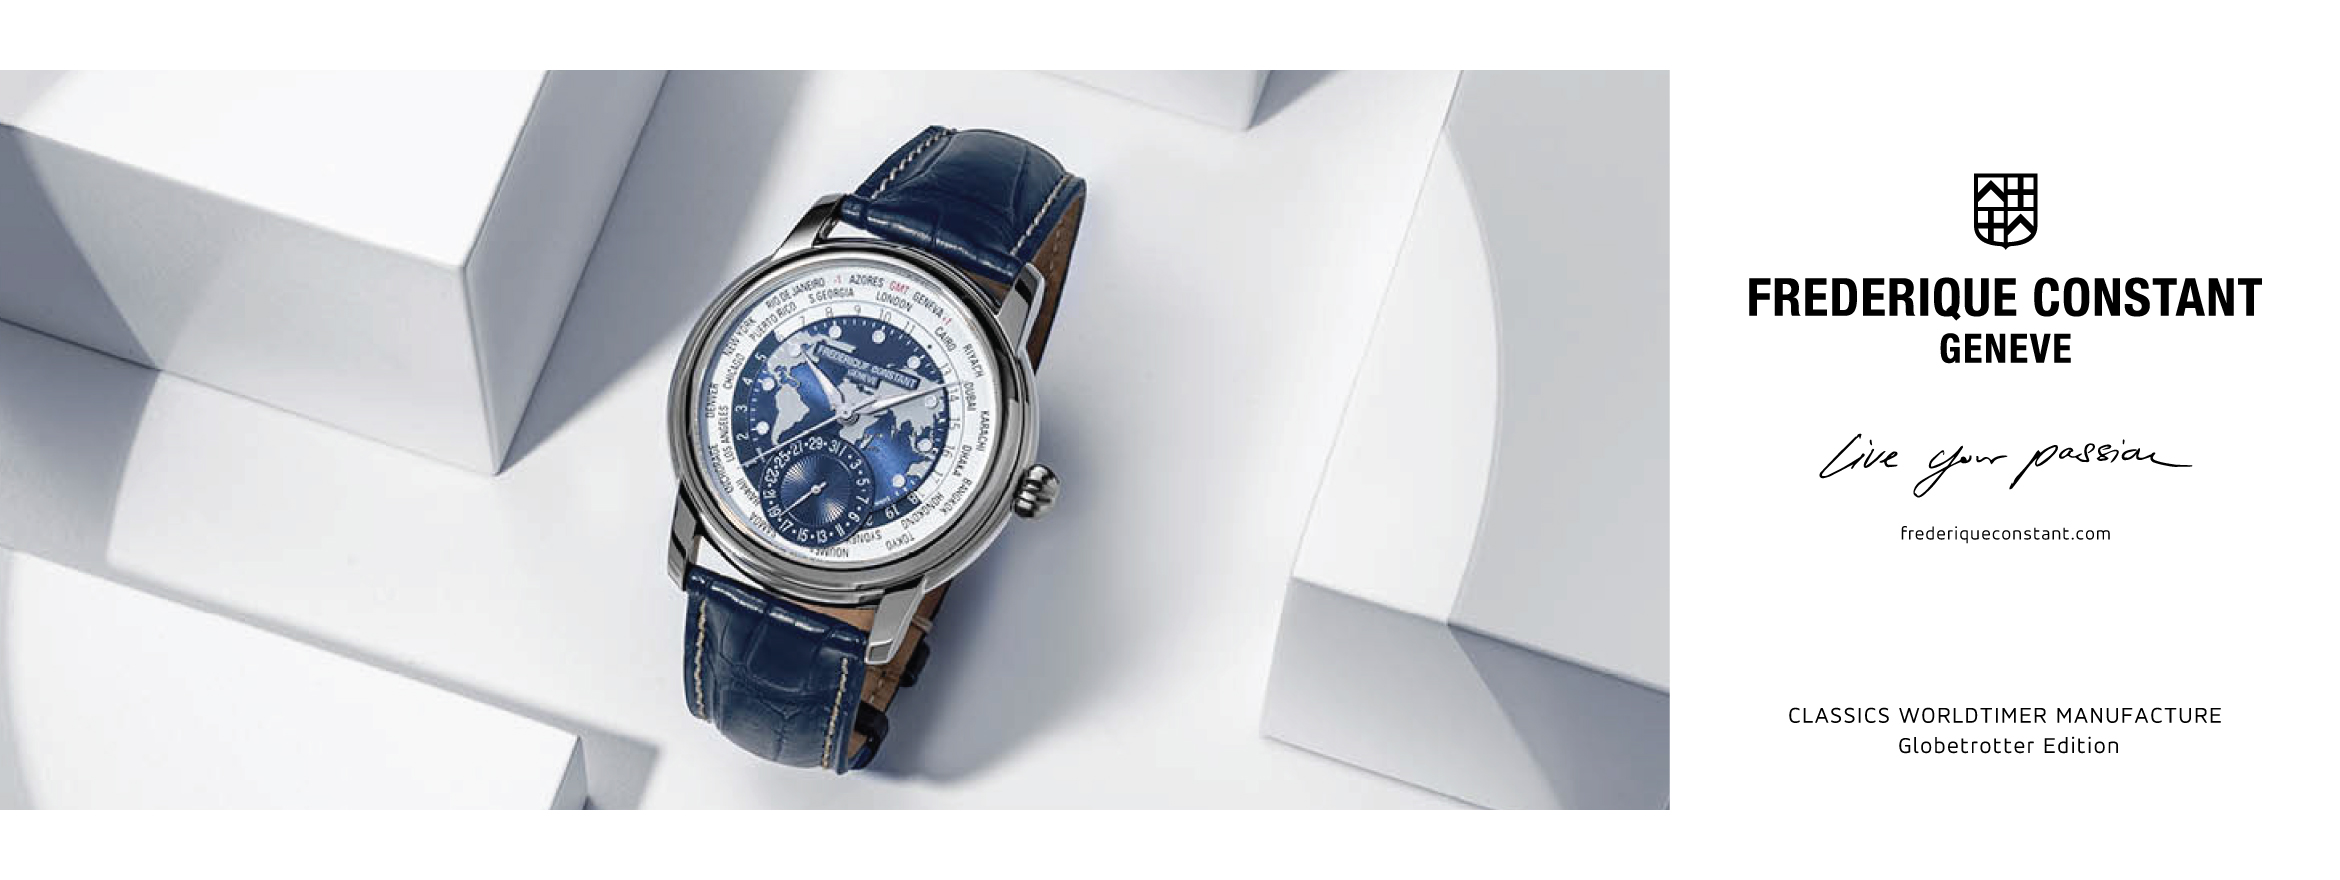 Frederique Constant Now Available at Watches of Switzerland